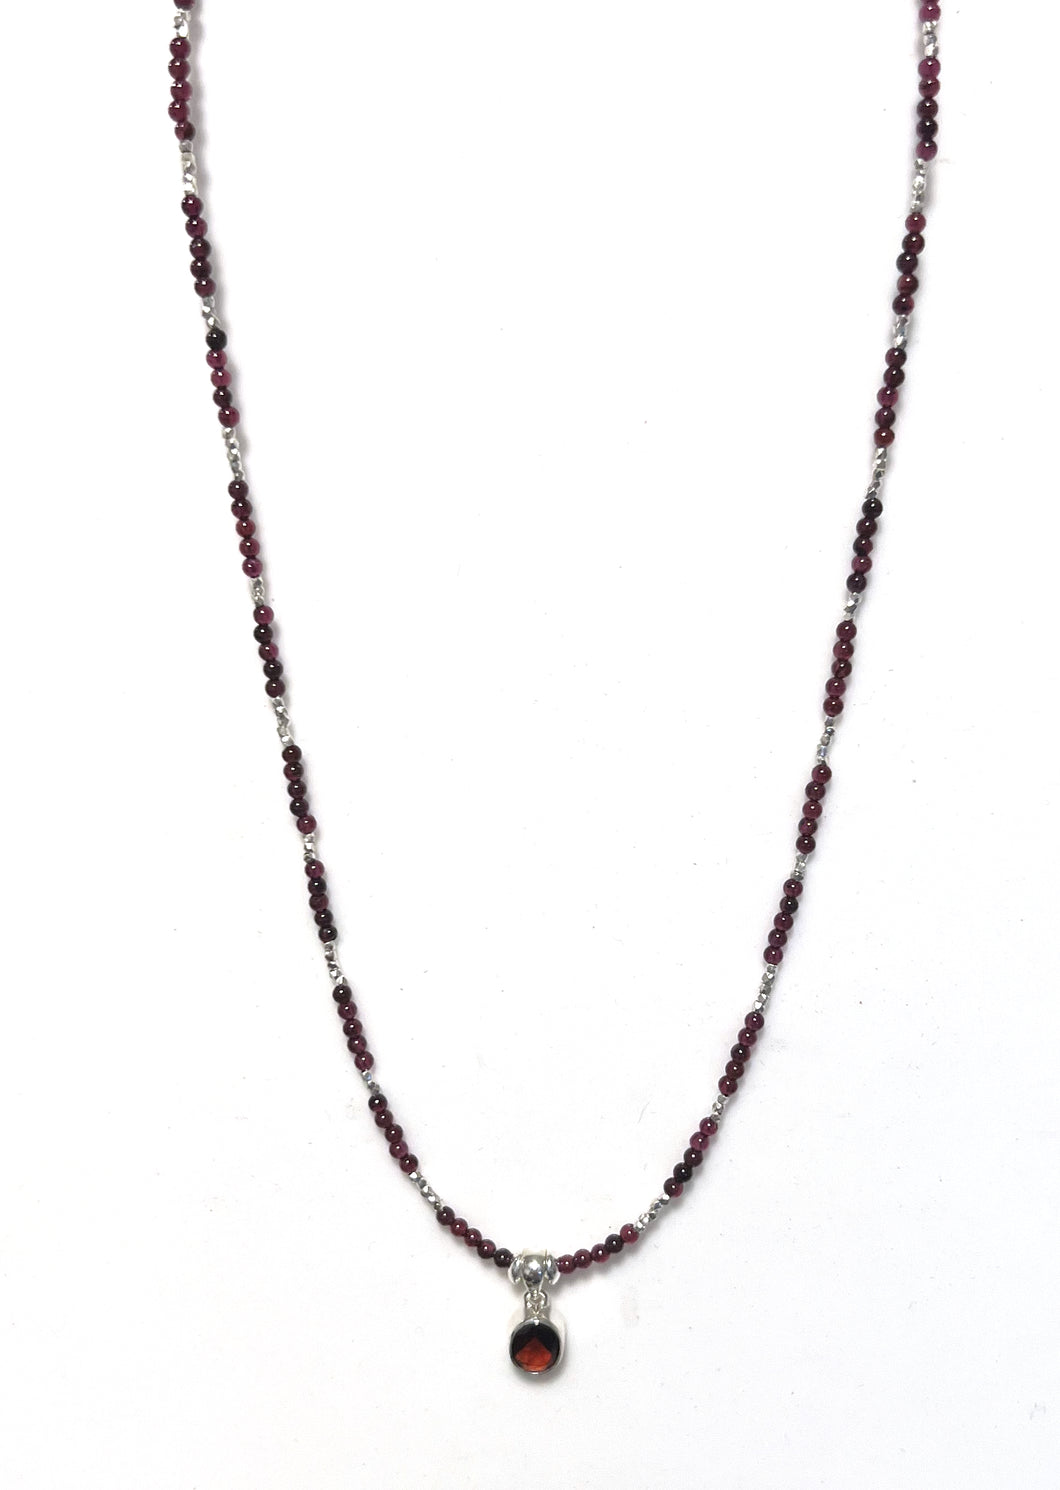 Australian Handmade Red Necklace with Garnet Beads Garnet Pendant and Sterling Silver